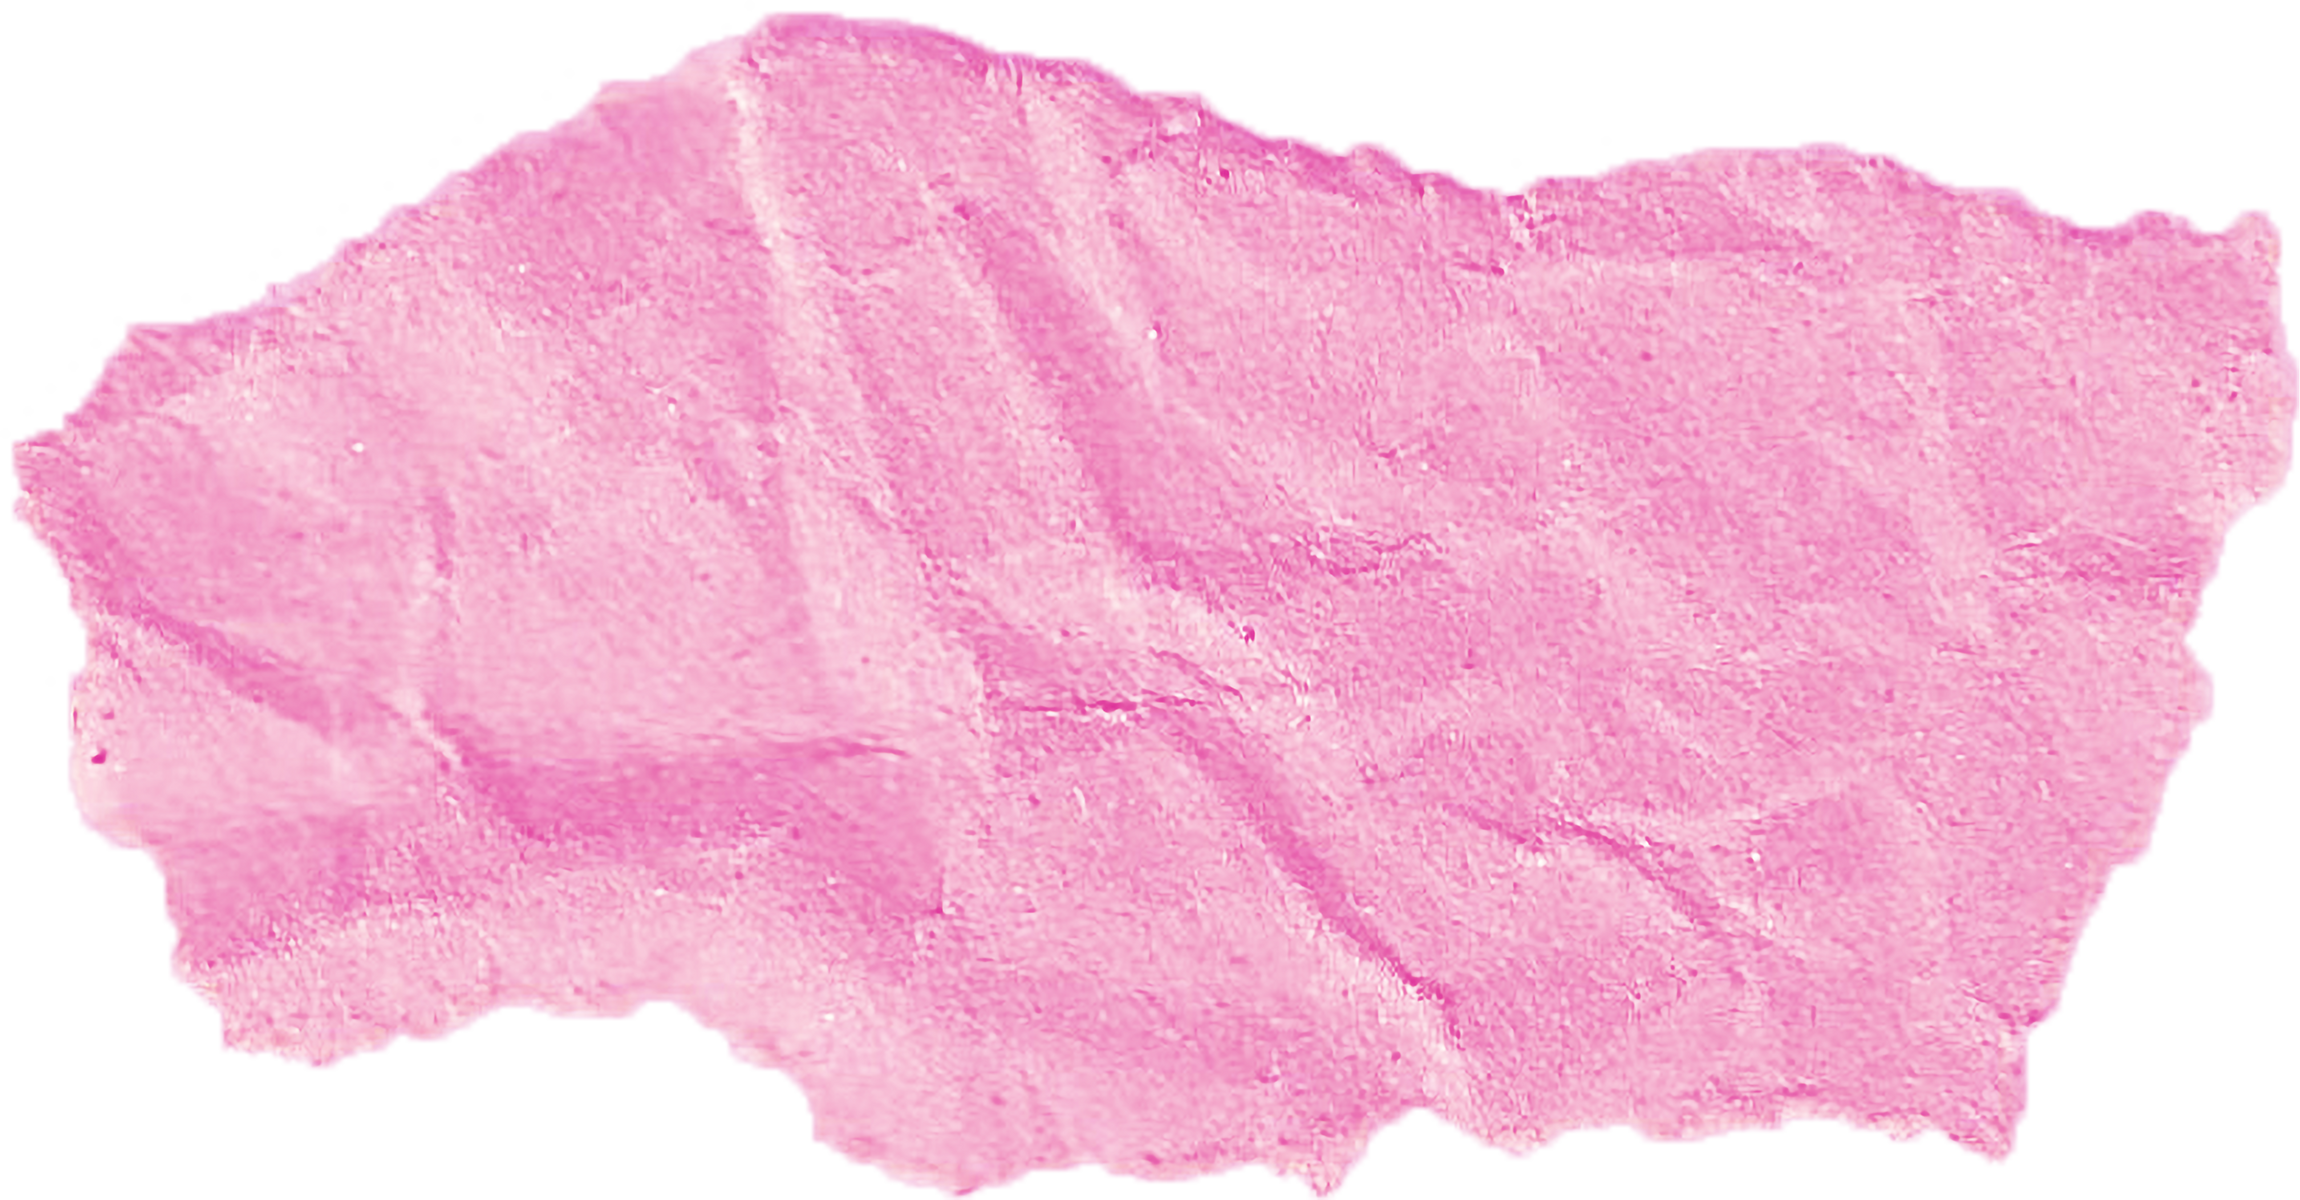 Torn Paper, Ripped Piece of Paper, Crumpled Light Pink Paper